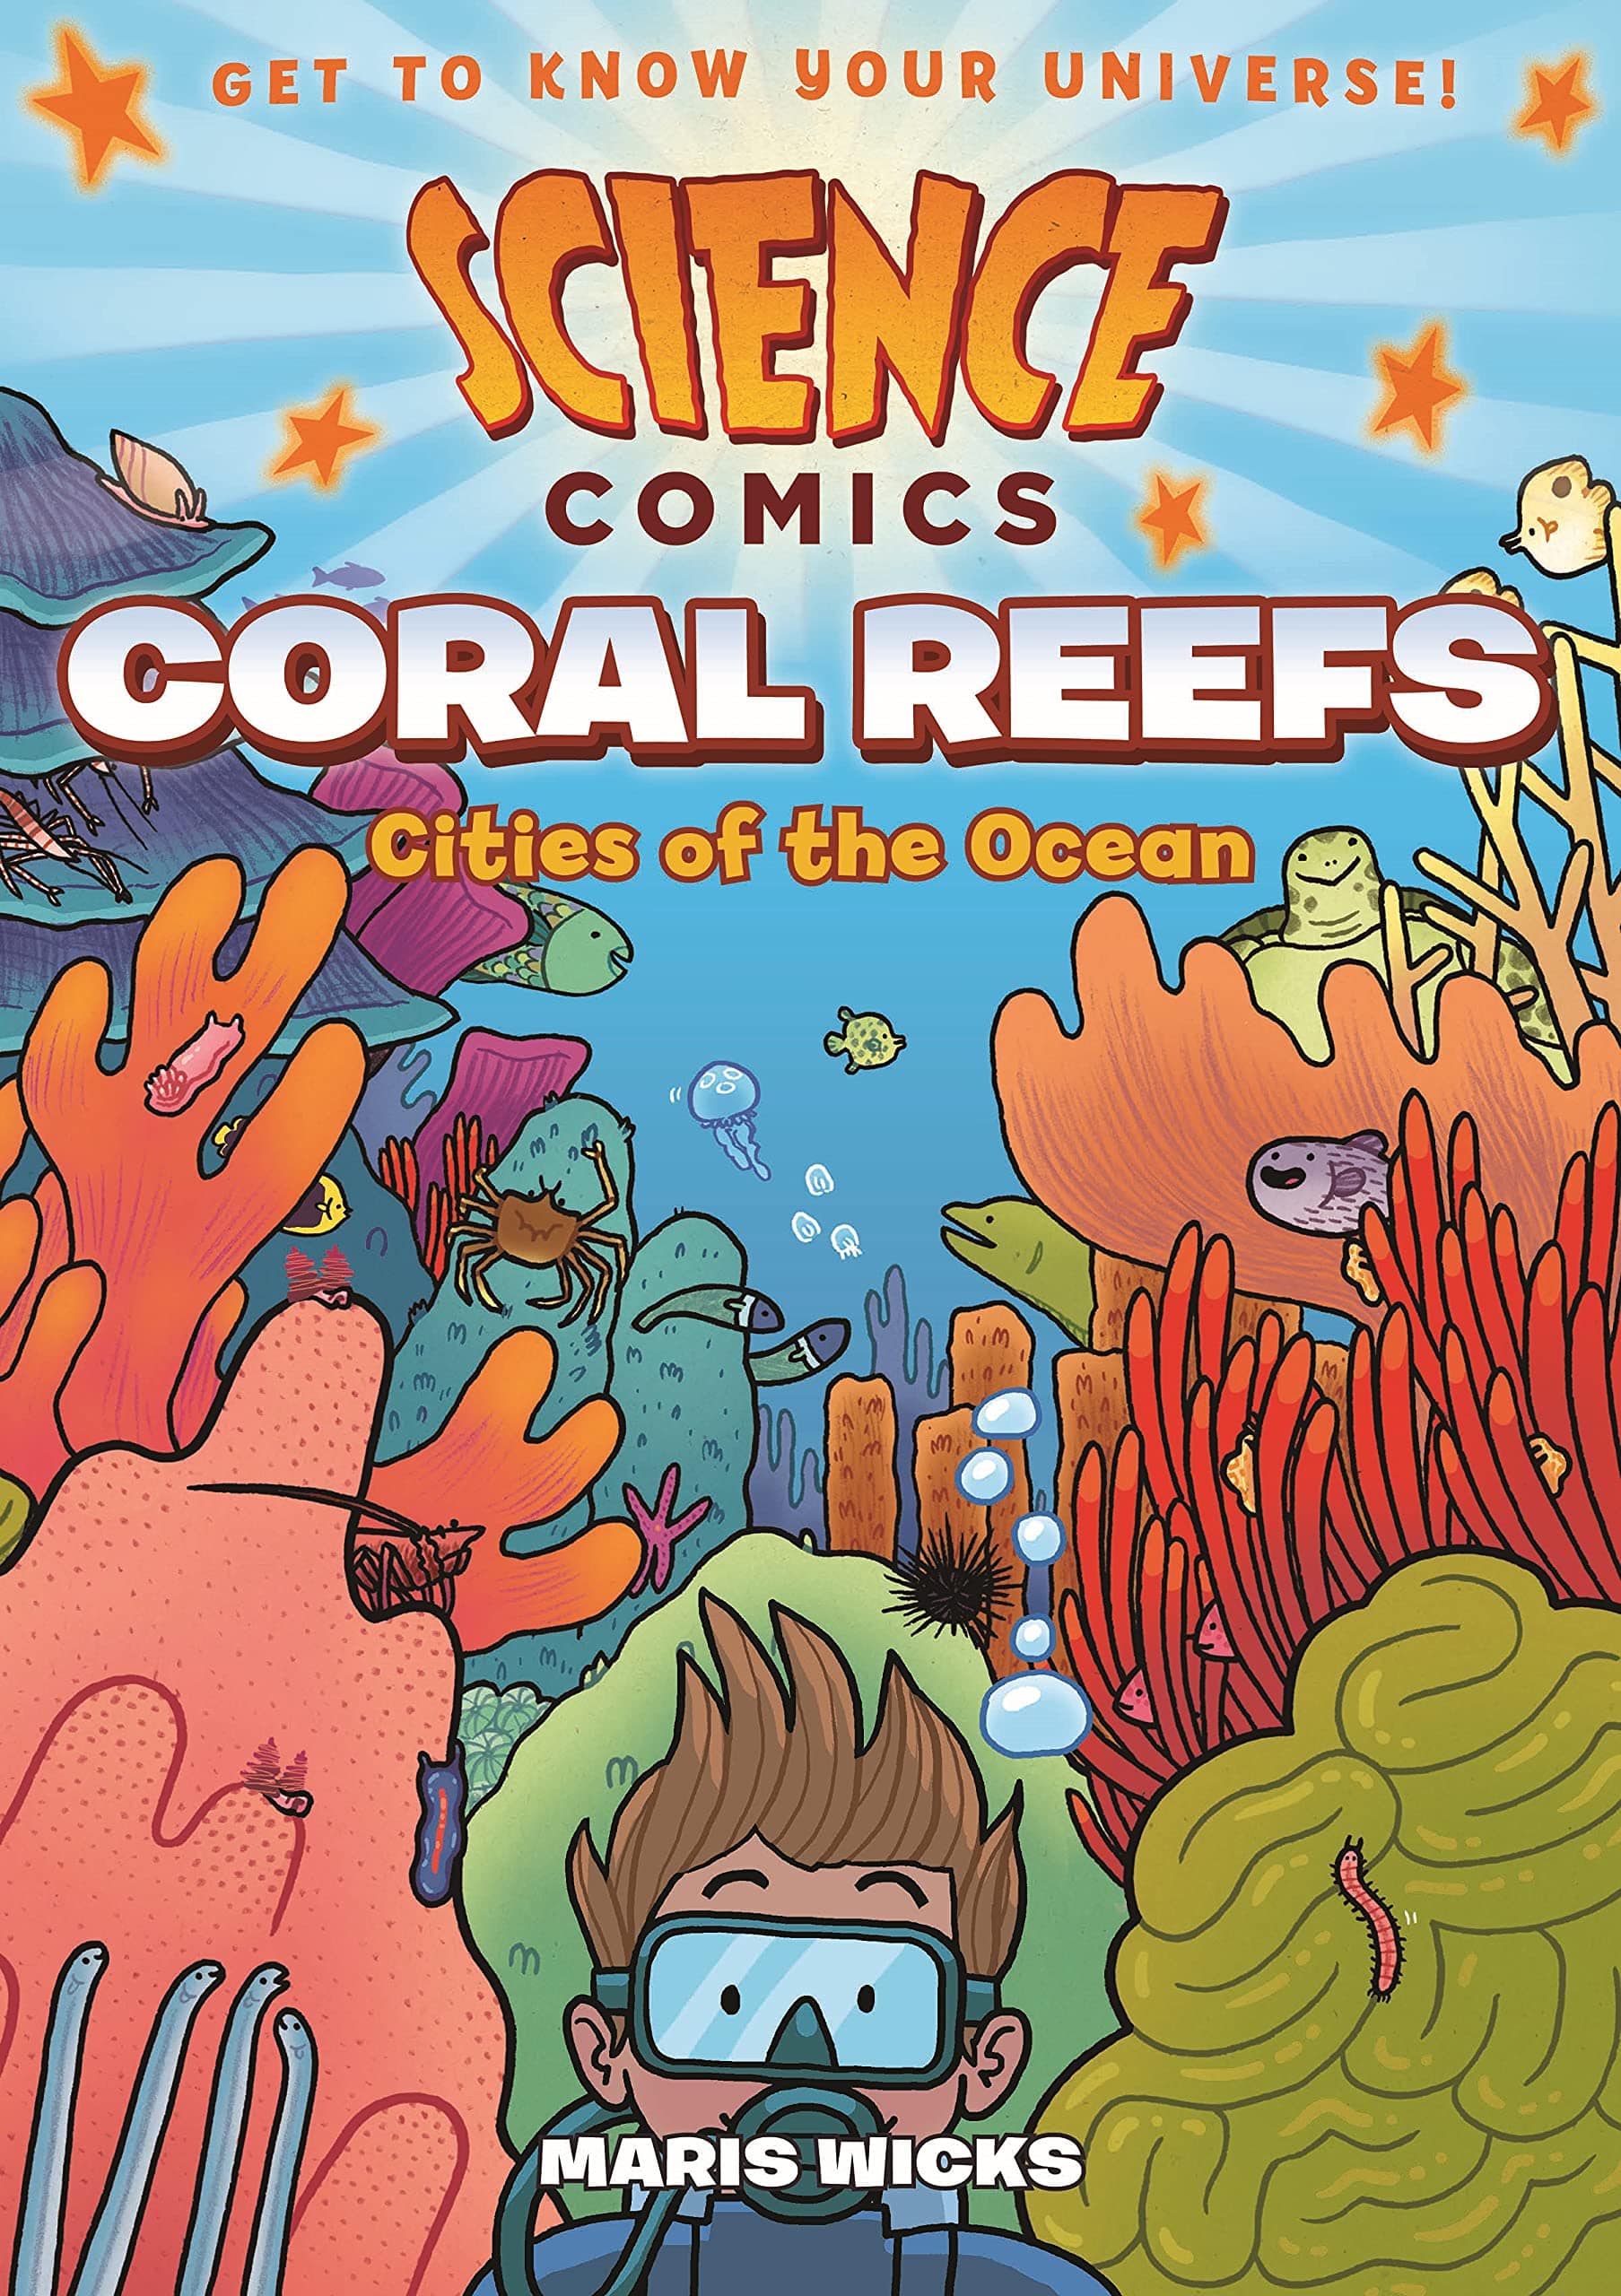 Science Comics - Coral Reefs Cities of the Ocean